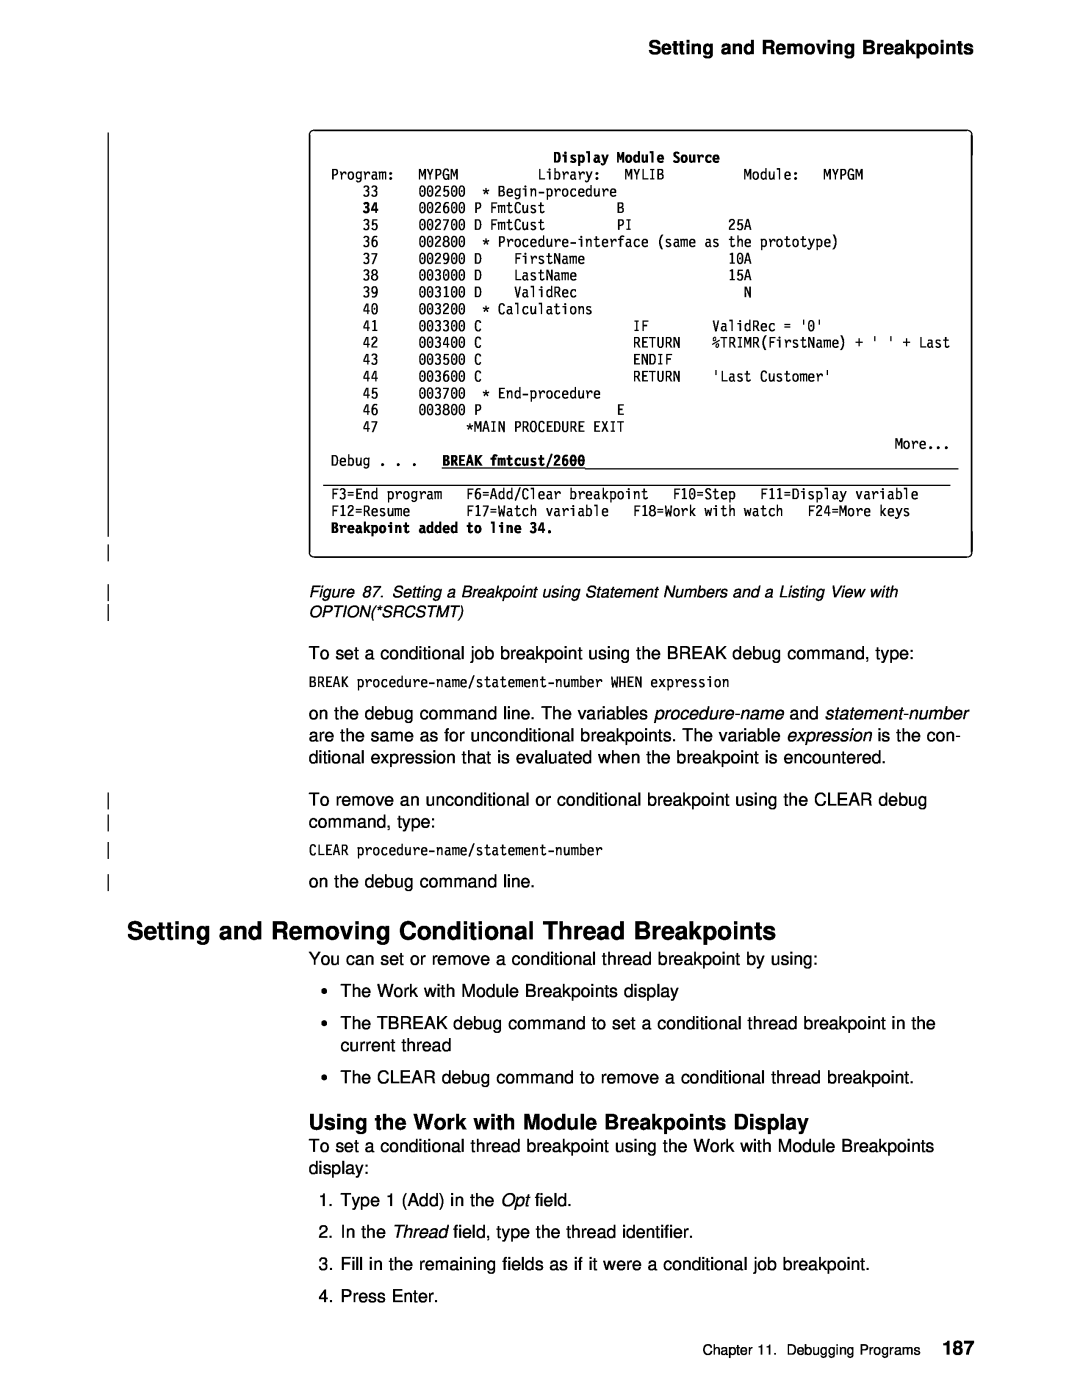 IBM AS/400 manual Setting and Removing Conditional Thread Breakpoints, Using the Work with Module Breakpoints Display 